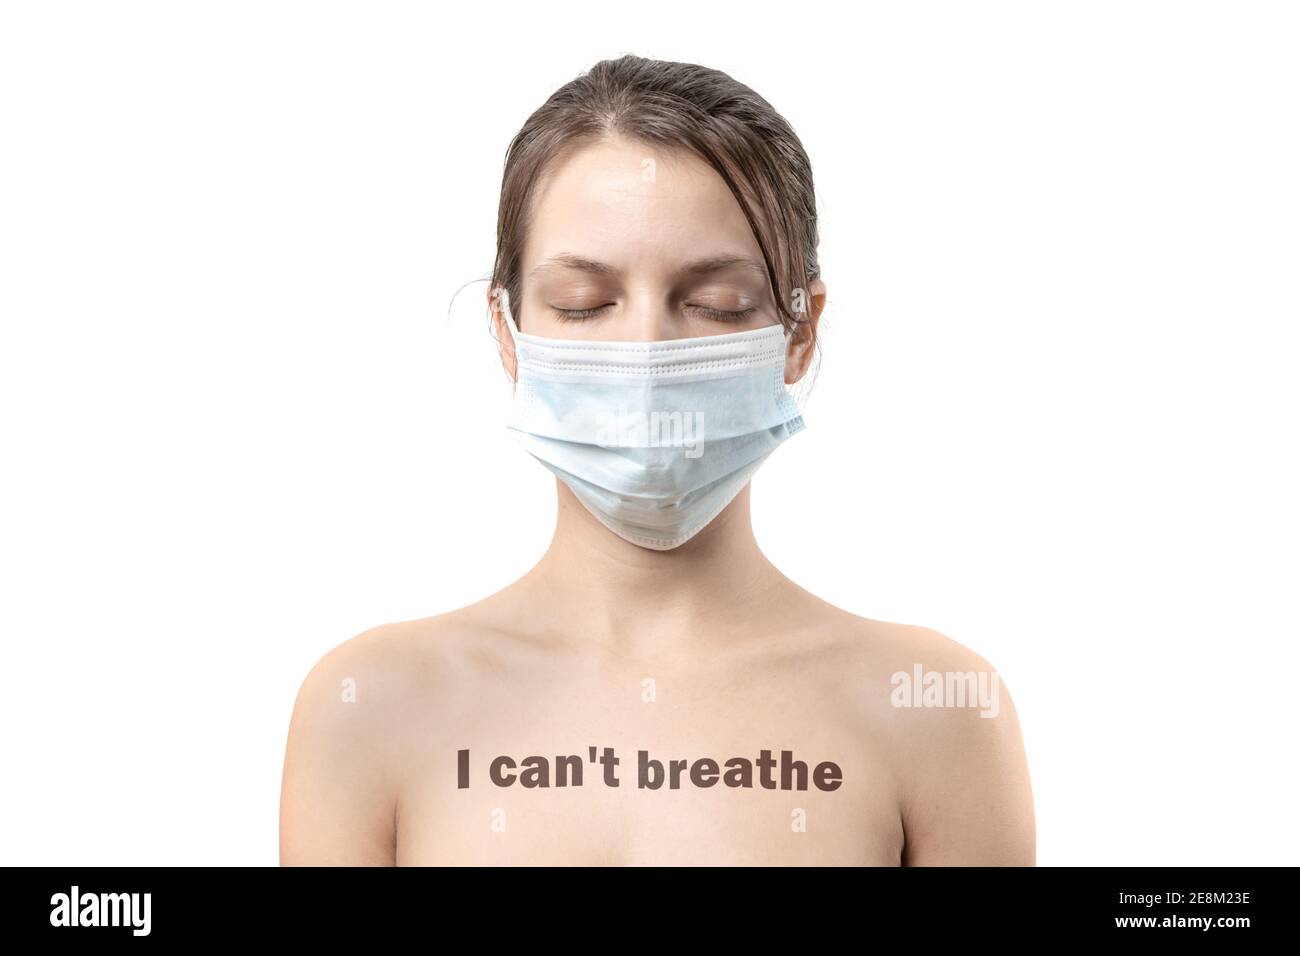 Anti-mask protest and anti-propaganda of the COVID-19 pandemic poster 'I can't breathe'. Sad young woman in a medical mask with eyes closed. Stock Photo